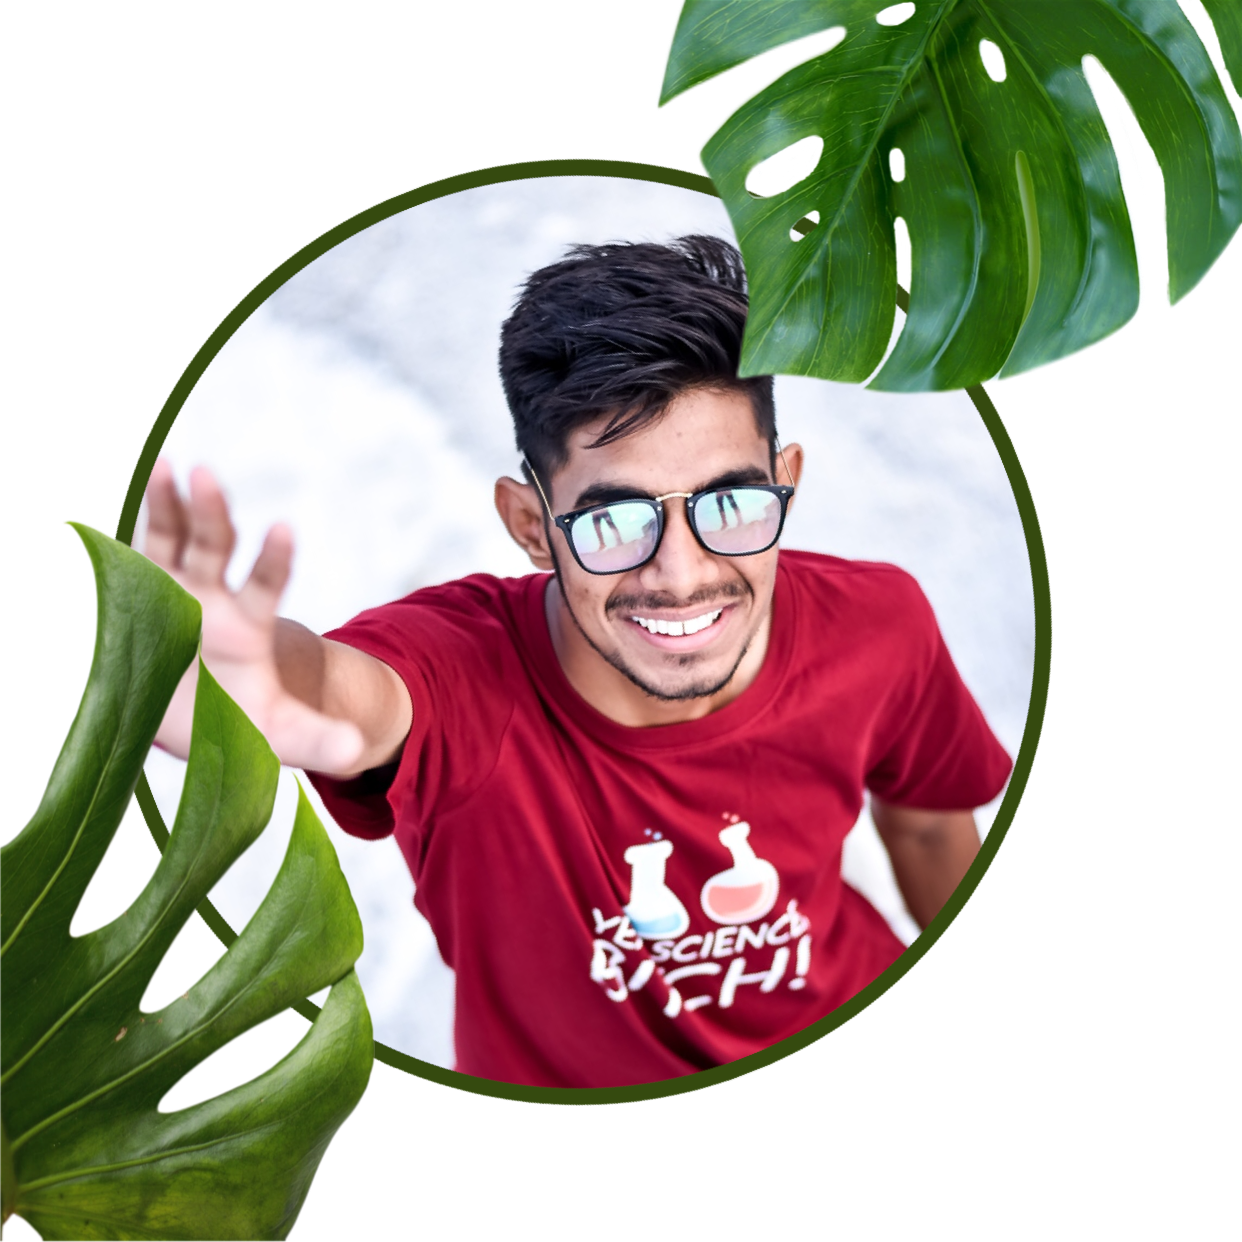 A Man In A Red Shirt And Some Green Leaves Whatsapp Stickers Template